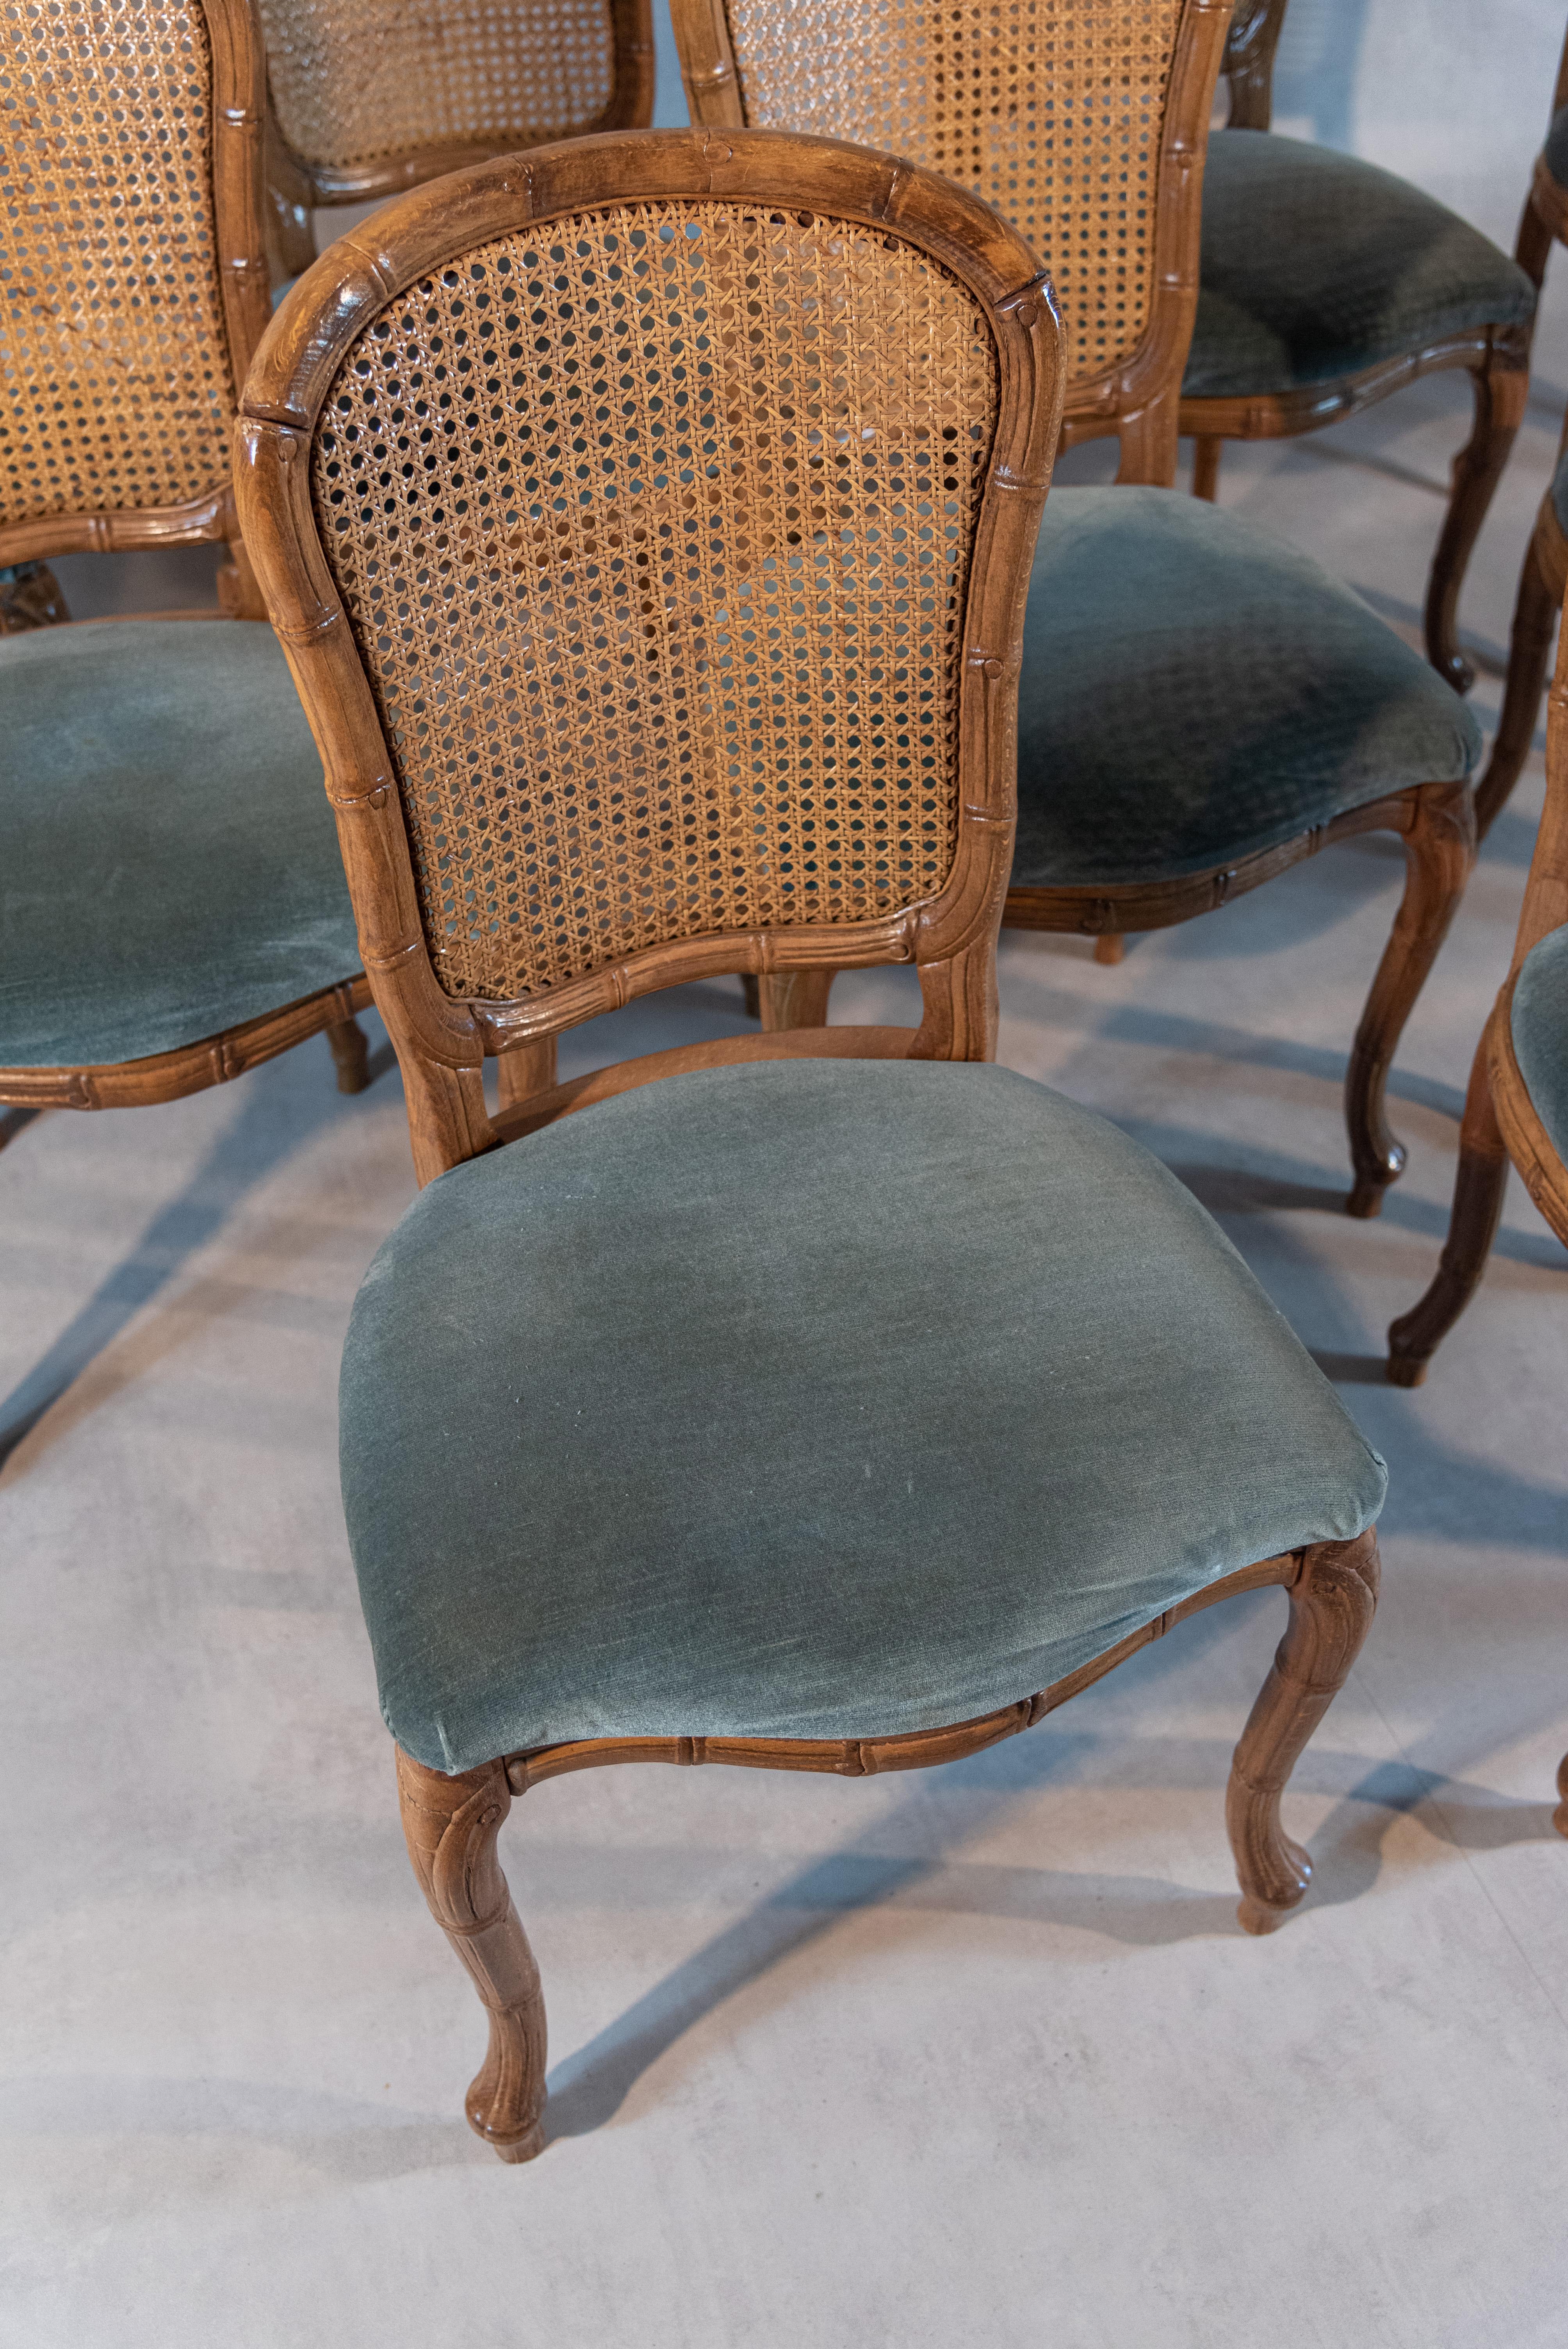 Elevate your dining experience with this exquisite set of ten midcentury caned chairs that effortlessly blend aesthetics with comfort. Crafted with meticulous attention to detail, the impressive cane work backrests showcase the artistry of finely